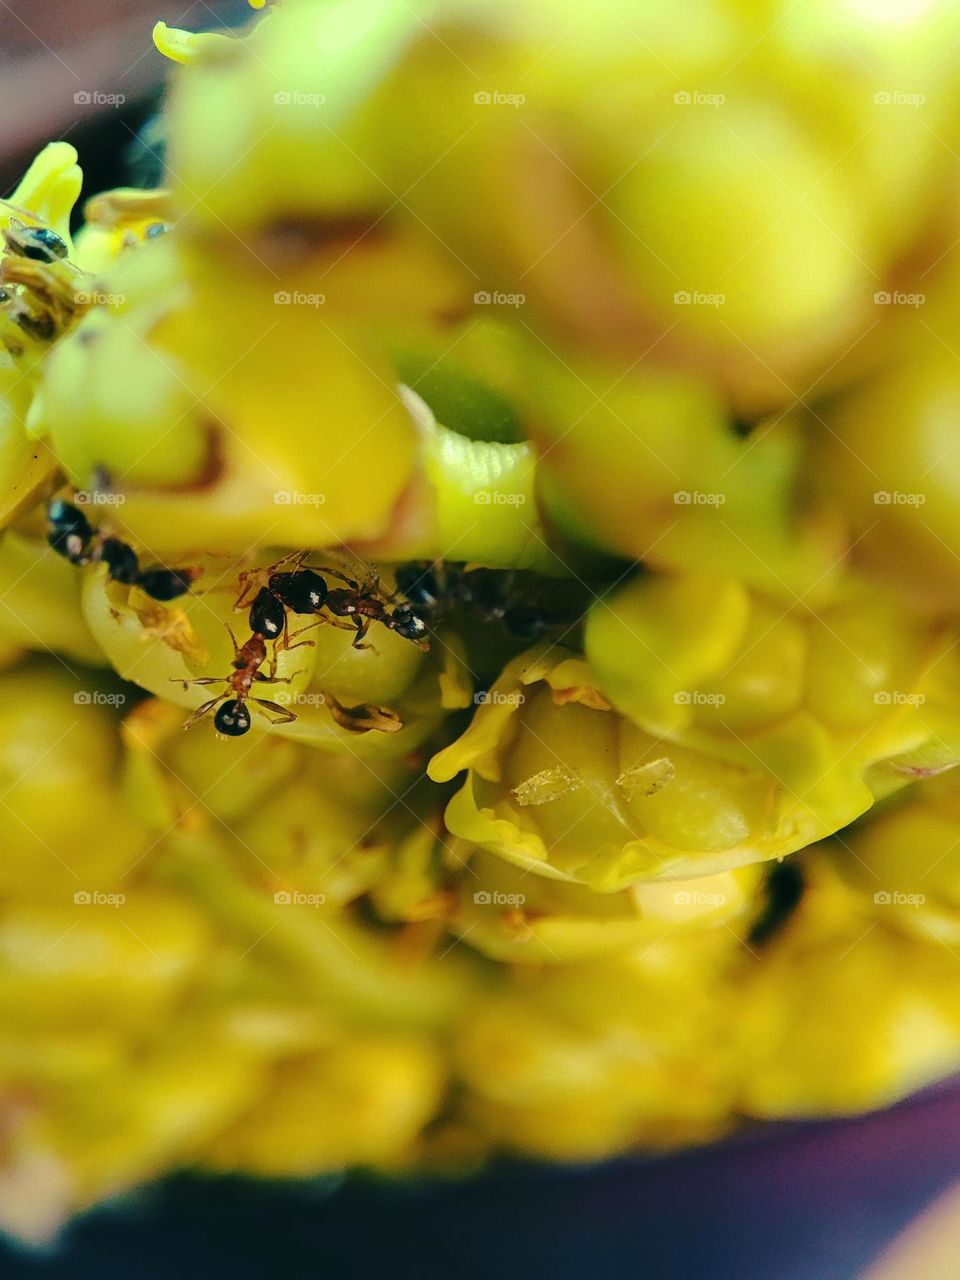 Ants on a plant